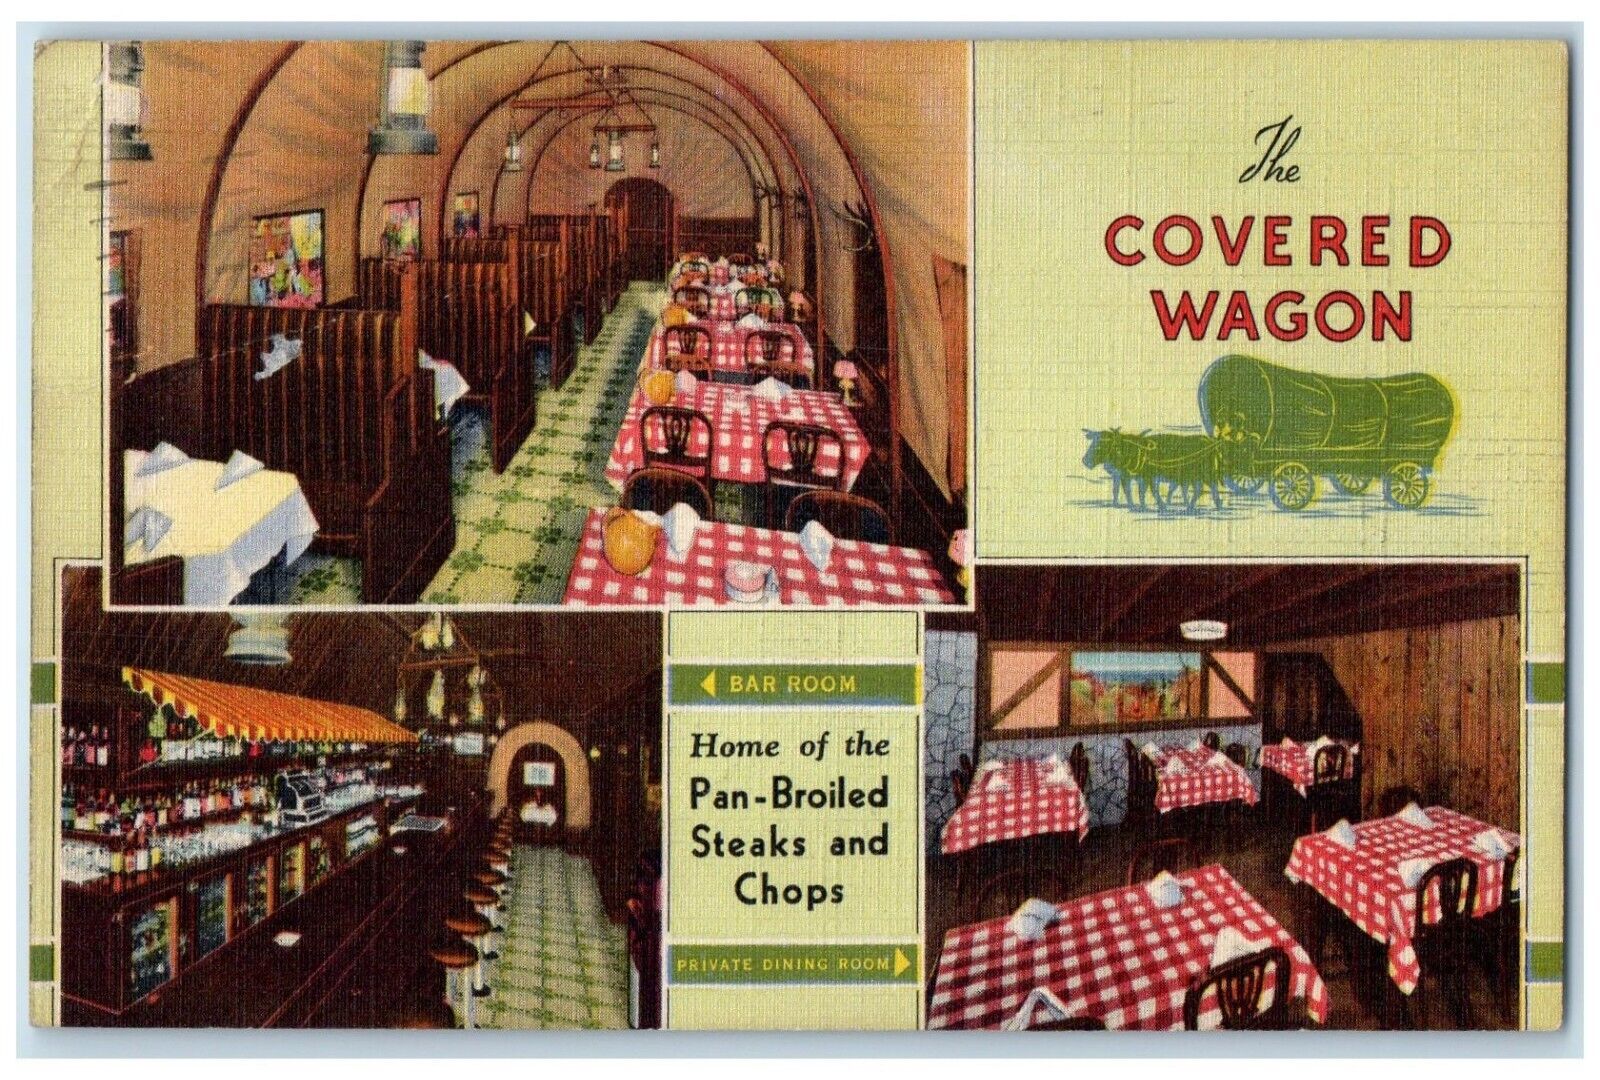 1959 Covered Wagon Restaurant Michigan Ave. Chicago Illinois Multiview Postcard